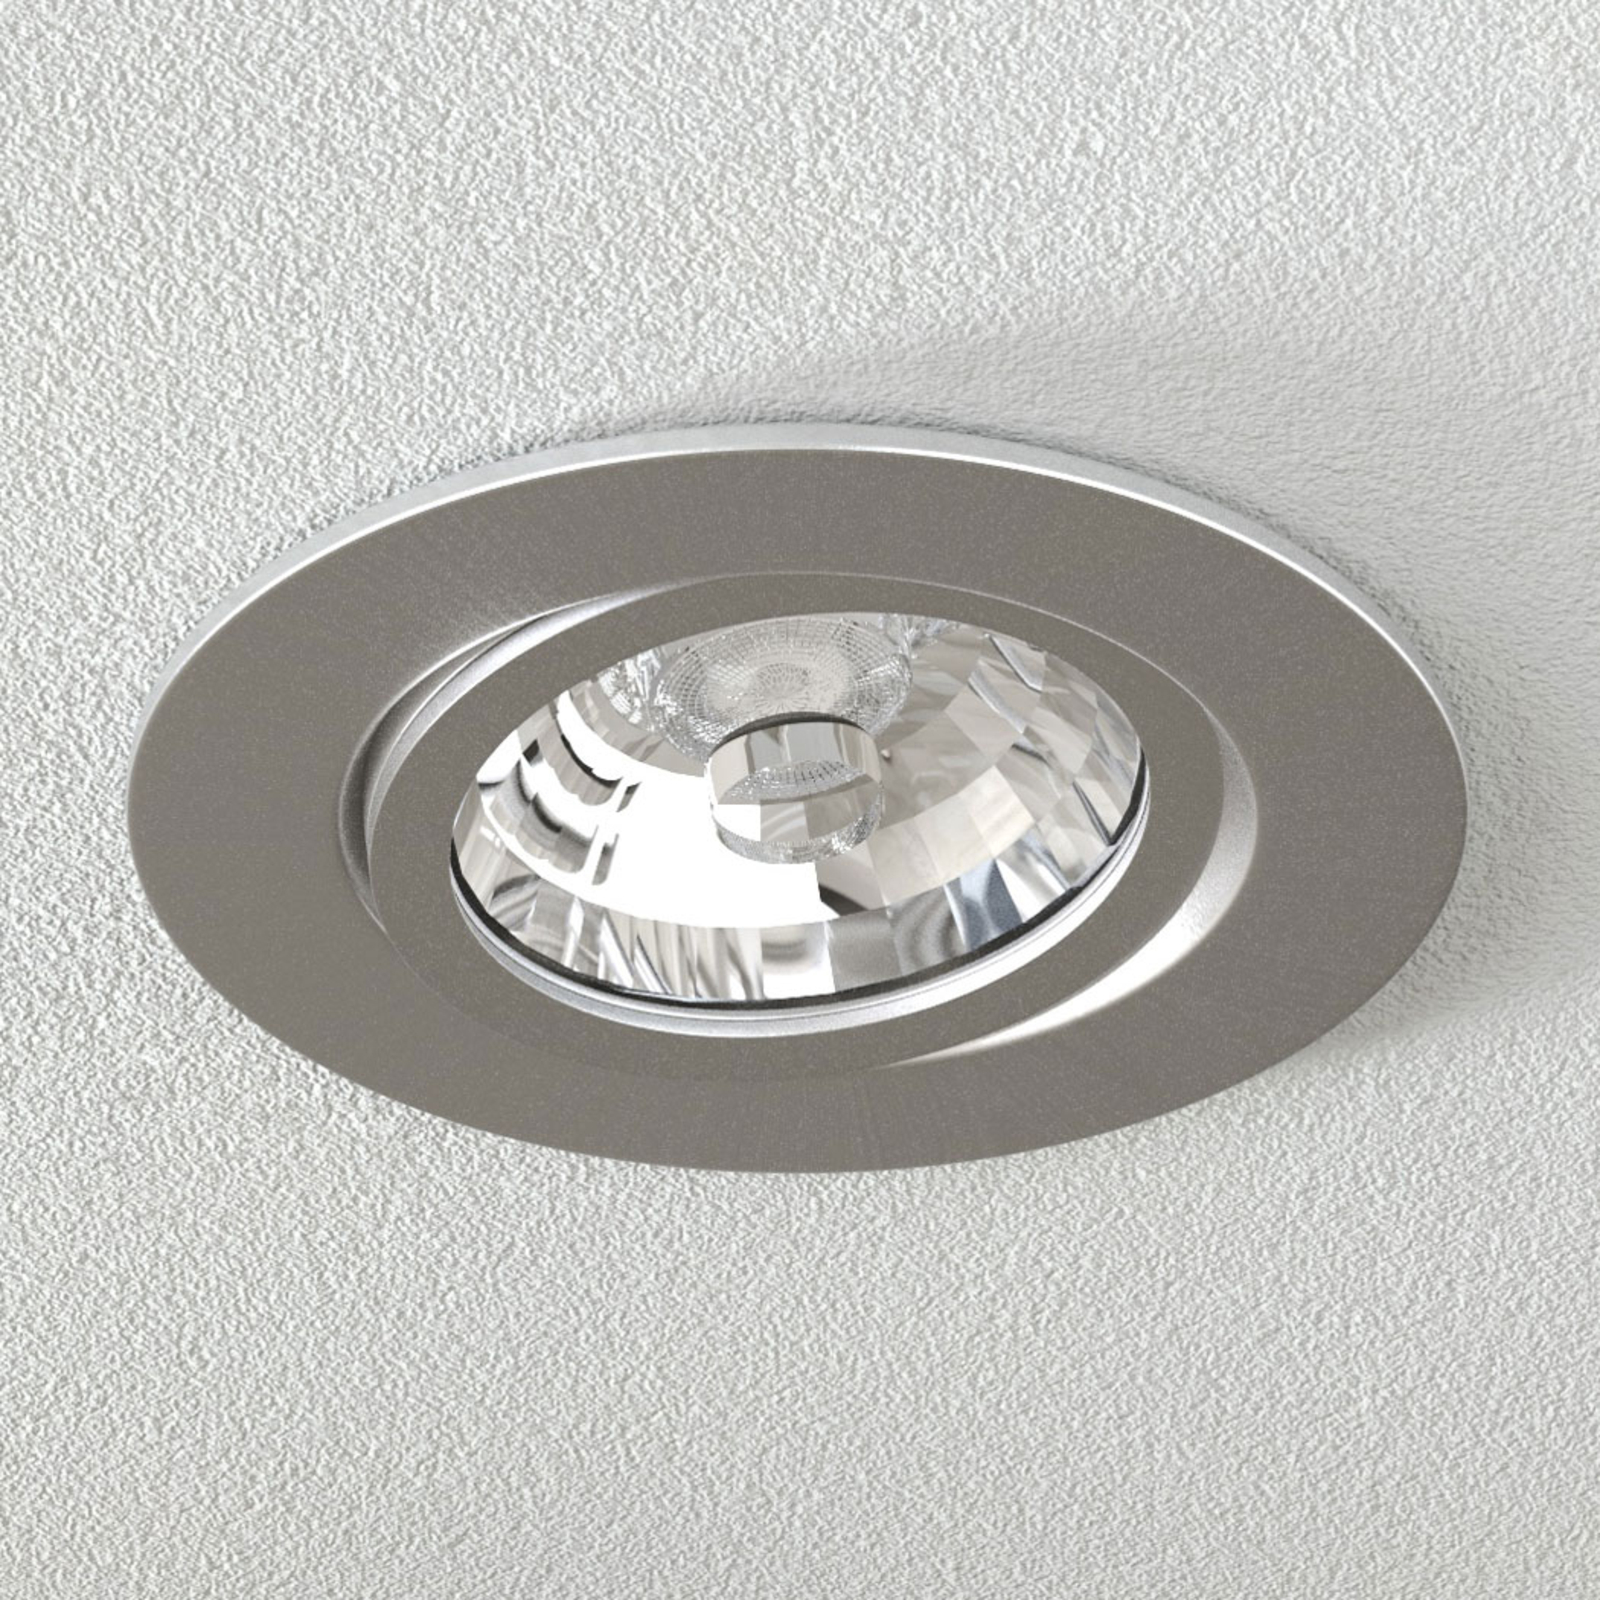 Led-inbouwlamp Rico 6,5 W geb. staal